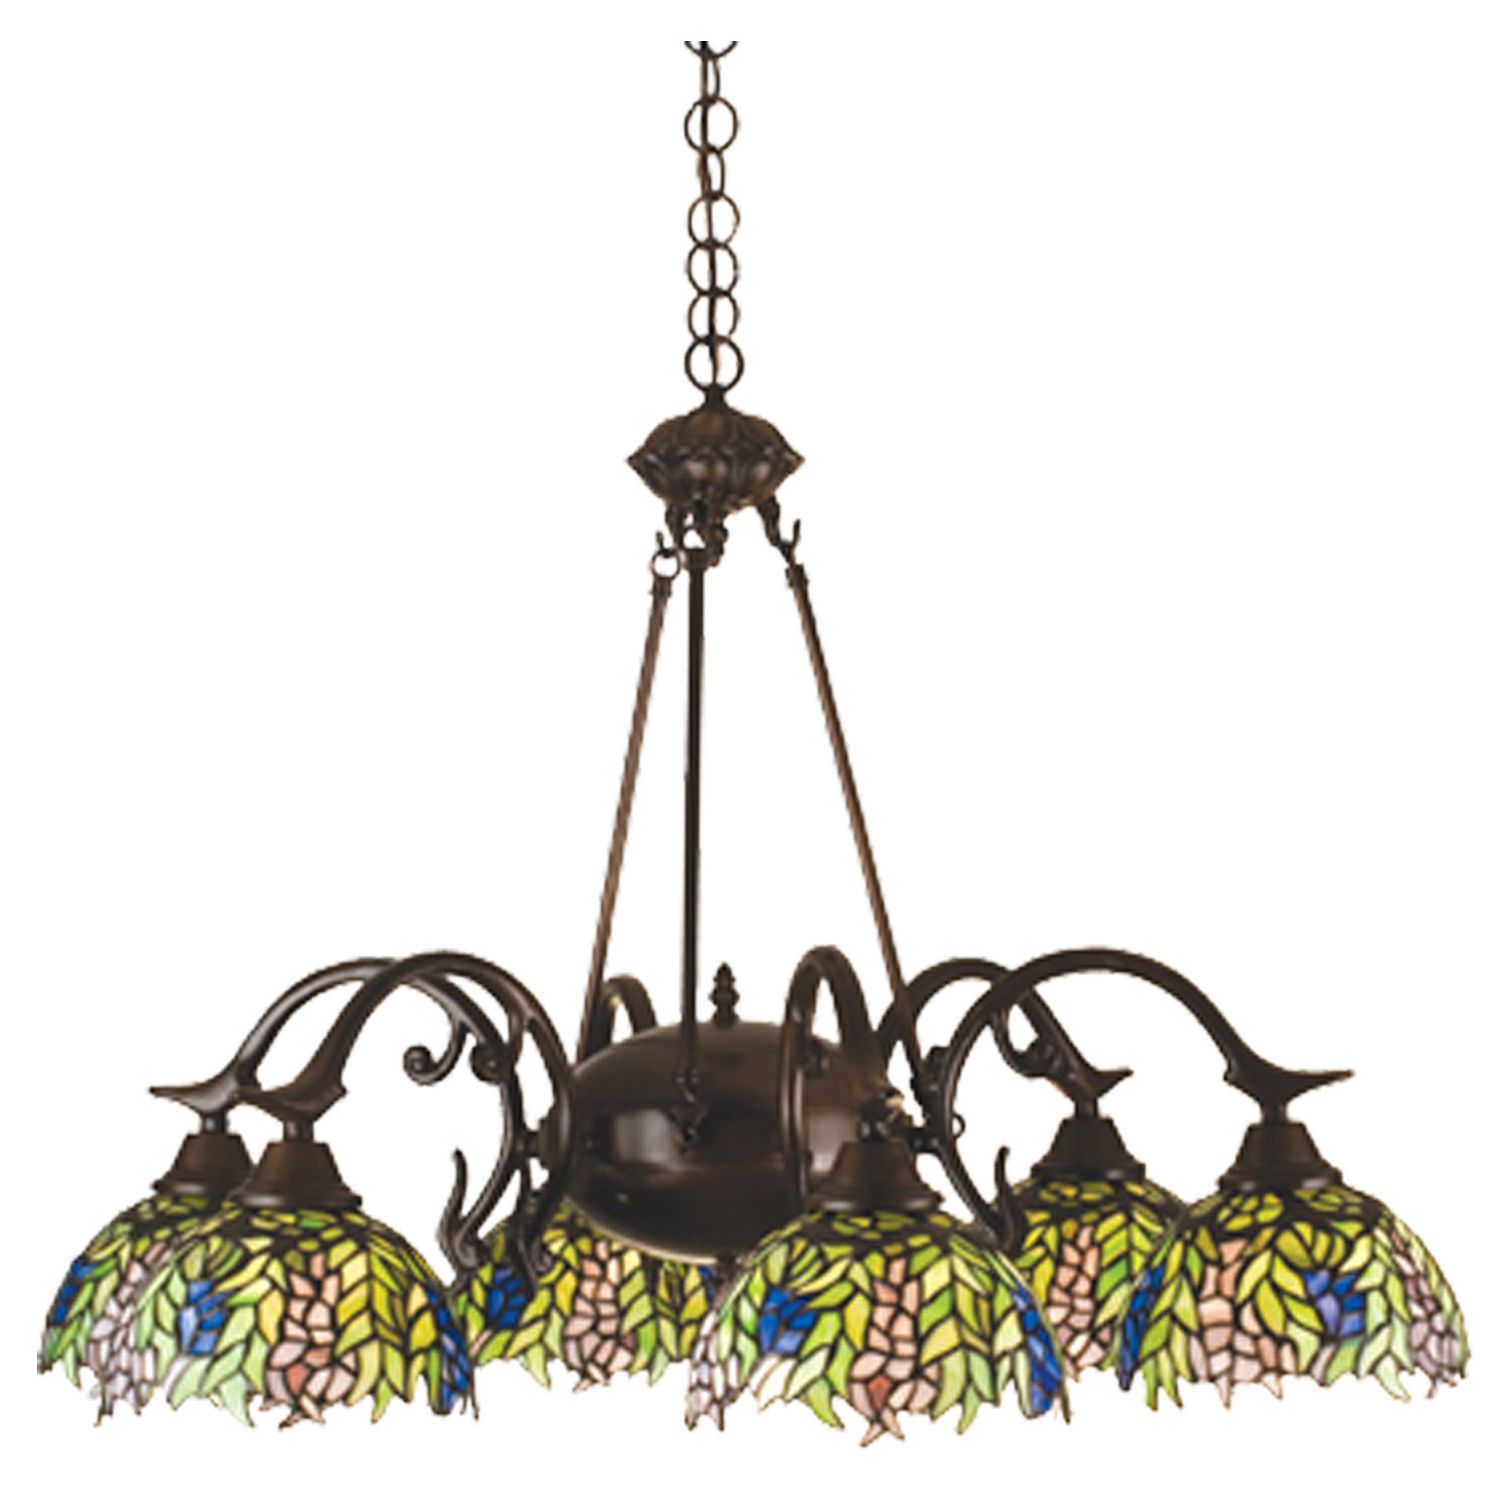 Well Liked Six Light Chandeliers Intended For Meyda 27397 Tiffany Honey Locust Six Light Chandelier (View 11 of 20)